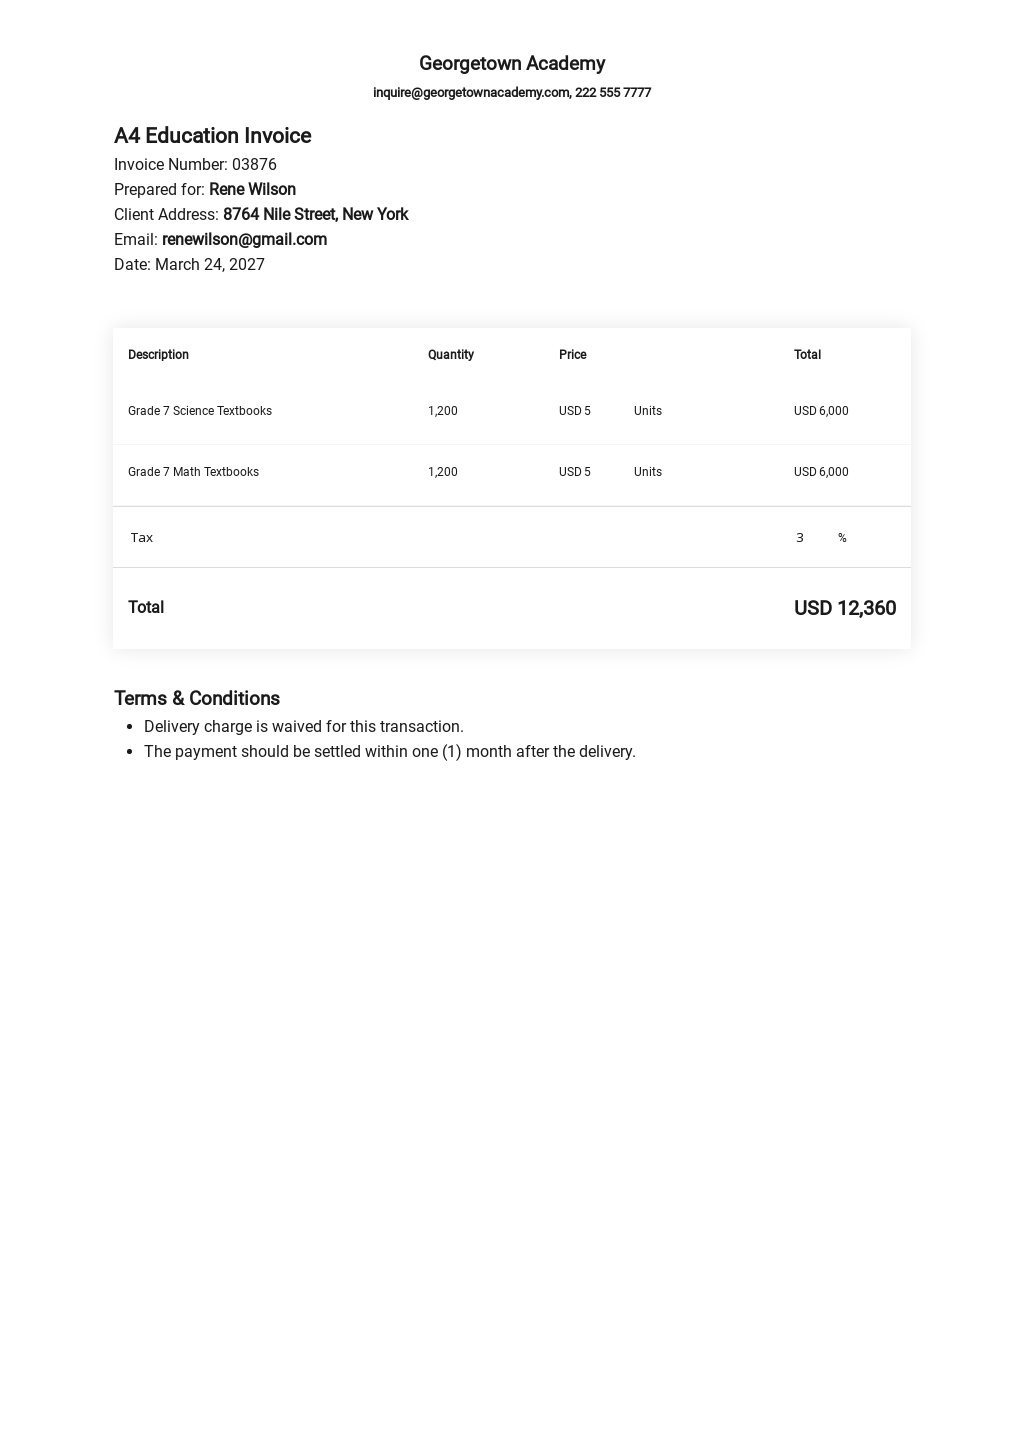 FREE Invoice Templates in Microsoft Publisher